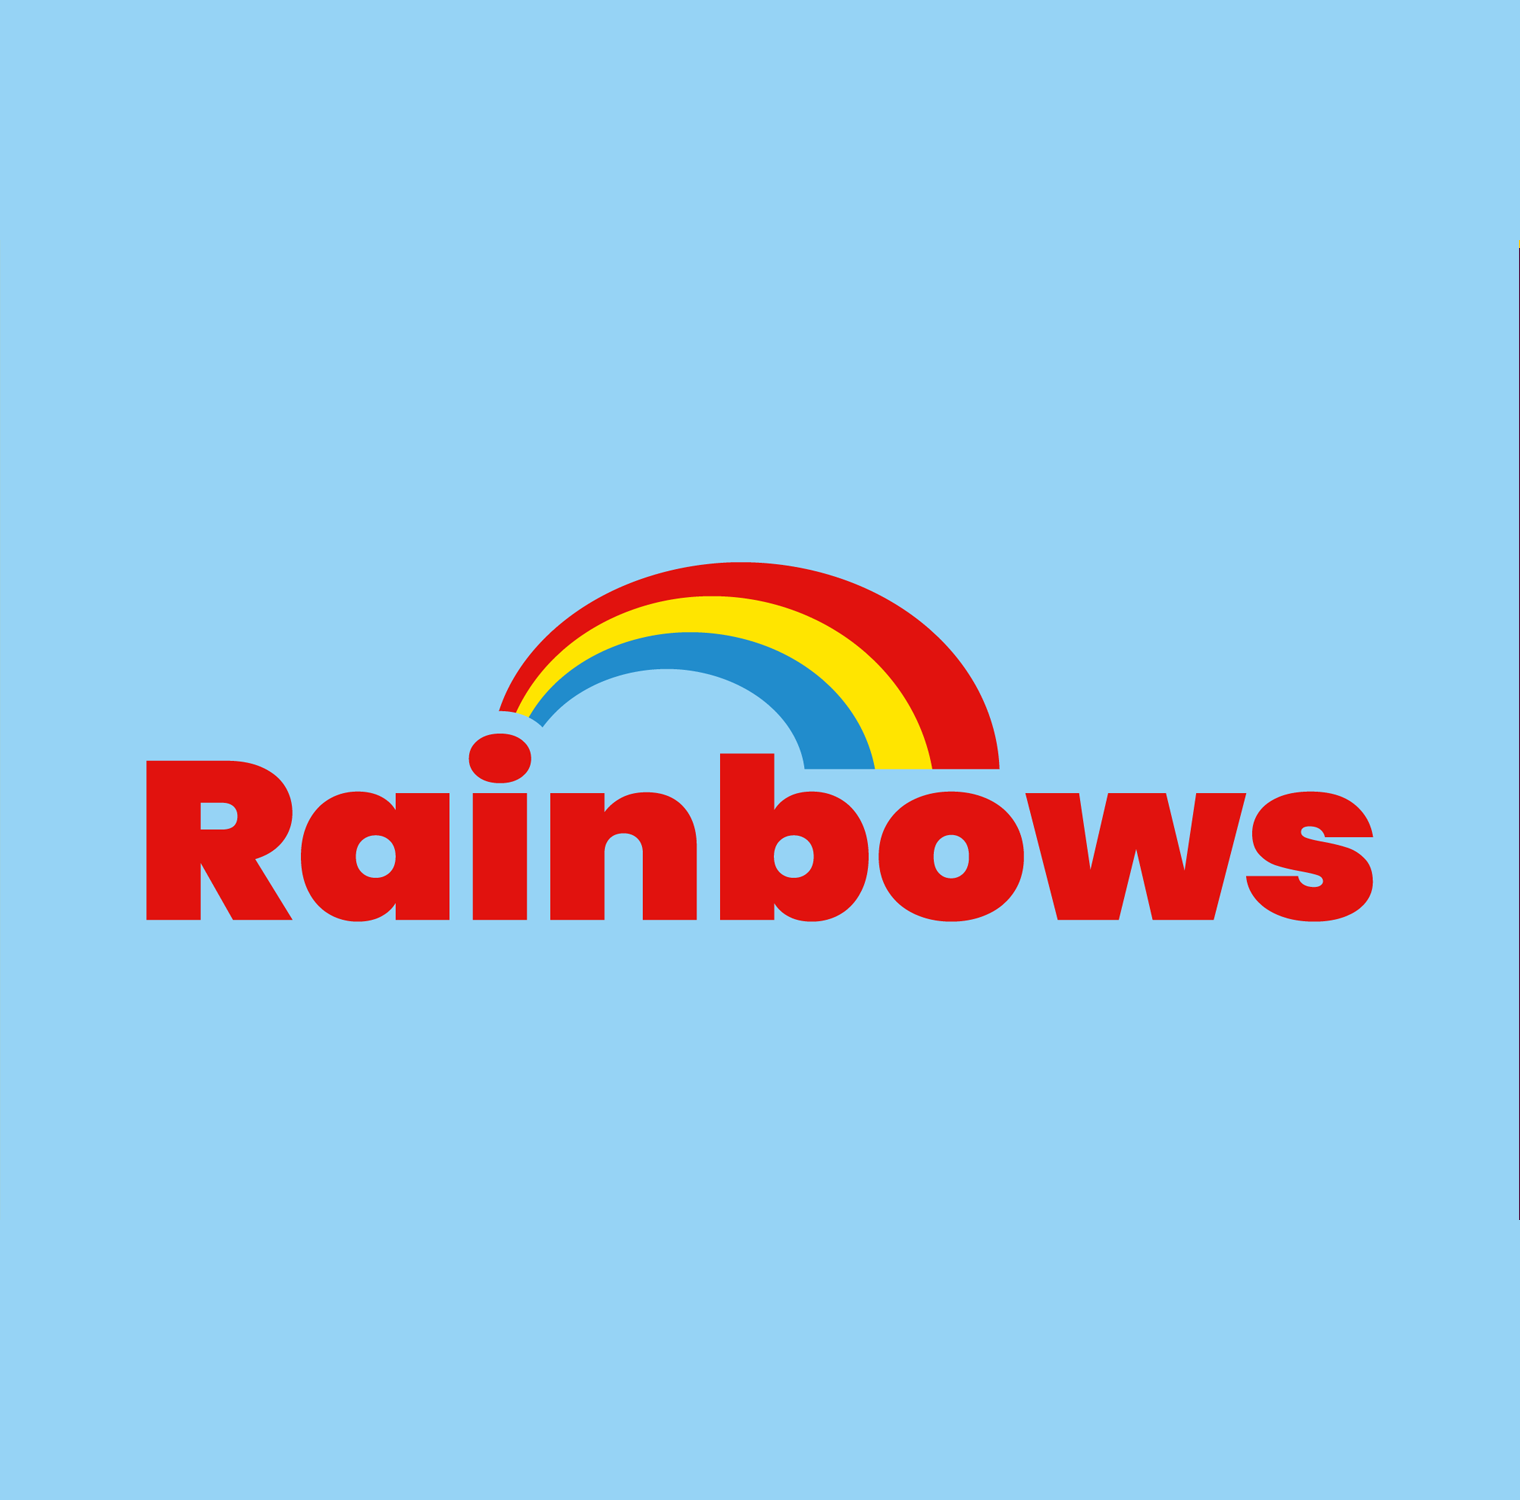 Rainbows written in red font on light blue background